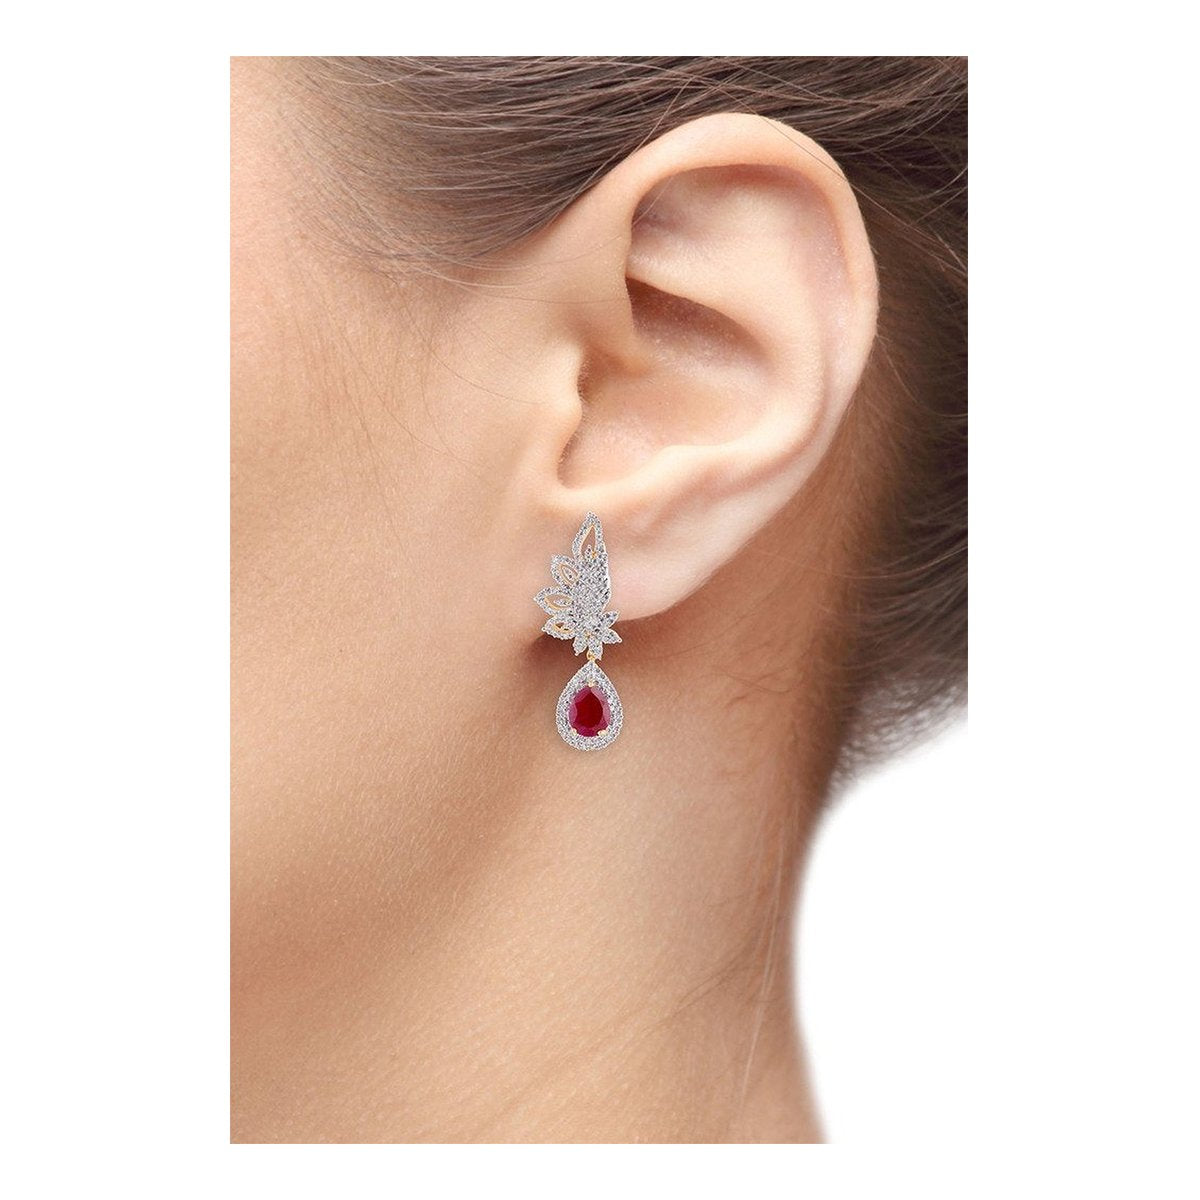 American Diamond Cz Ruby Red Leaf Cluster Earring For Women